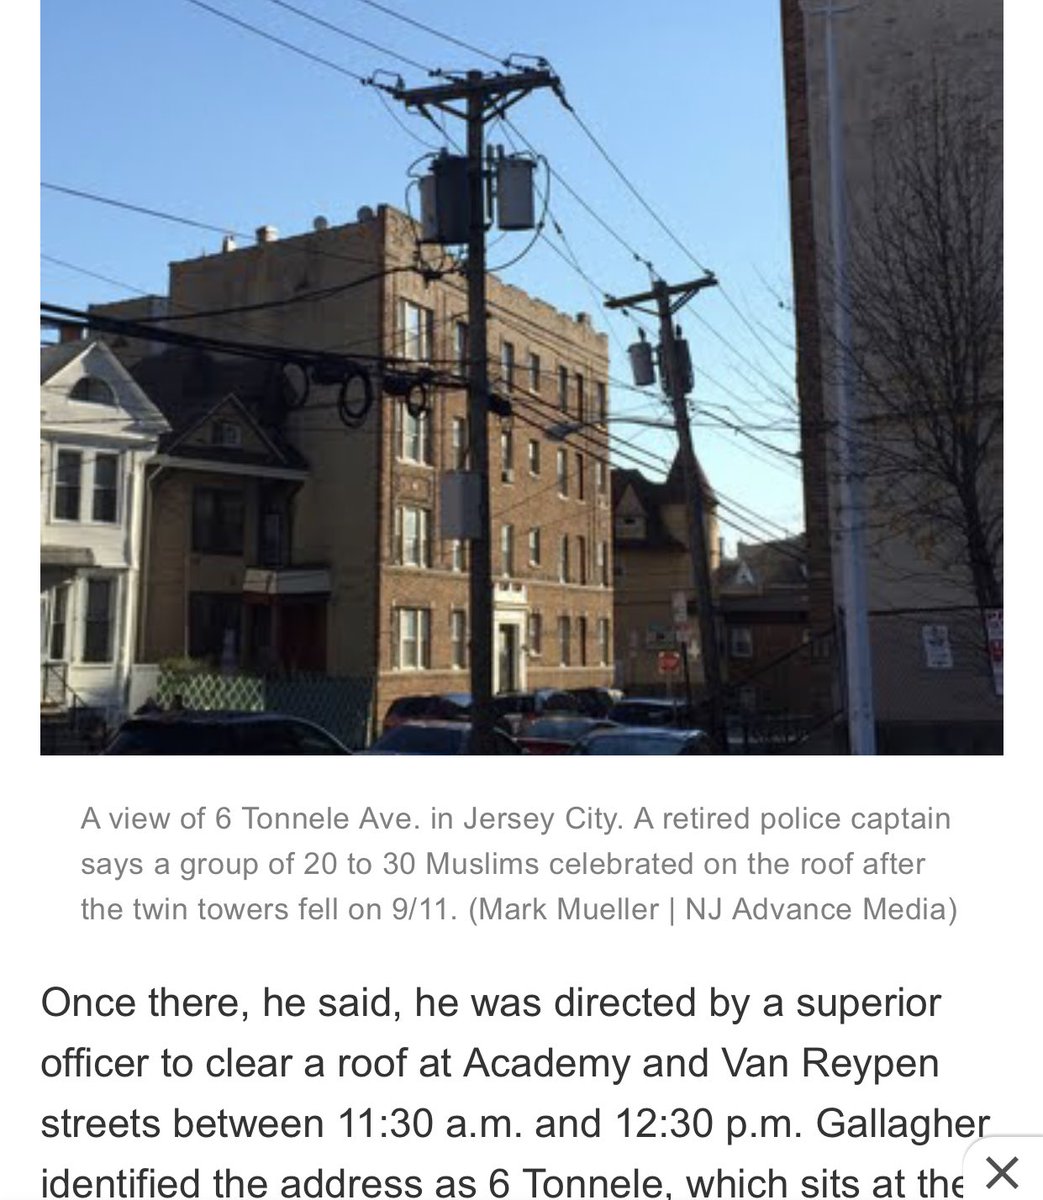 WHOARemember how Trump claimed he saw Muslims celebrating on a roofOddly, one of the men arrested that lived at that building, 6 Tonnele Ave, UNTIL 3-4 mo’s ago- worked for the Saudi consulate, which 3-4 mo’s prior bought 45th floor of Trump Tower for govt officials 